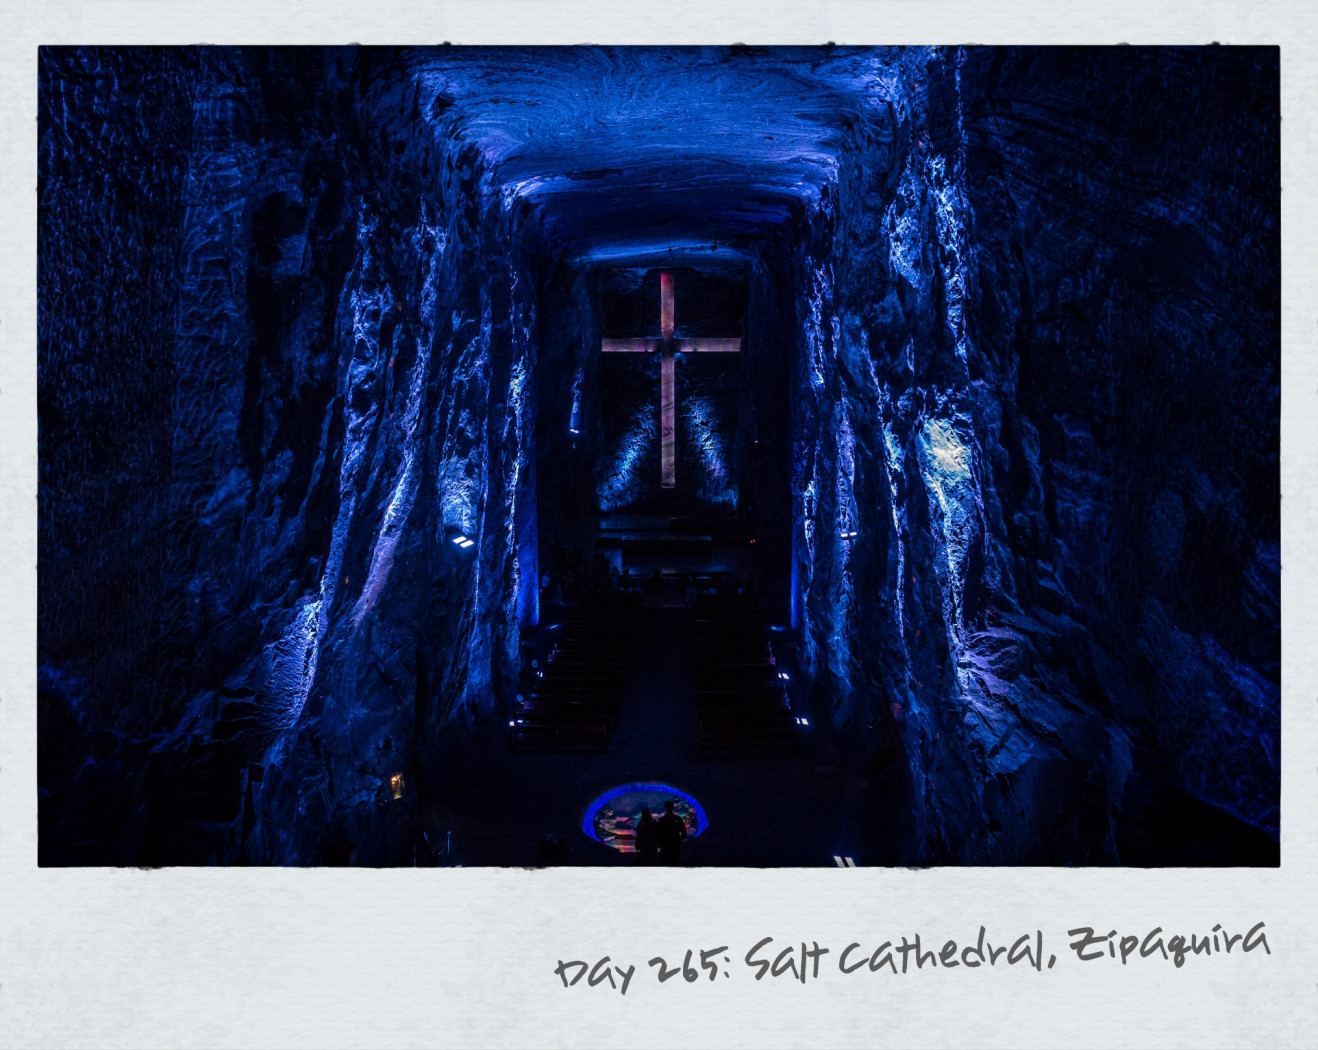 We meet up with Ardun, Jen and Antonia in Bogata and head out on local buses 50km north to visit the Salt Cathedral in Zipaquira. Built 20 years ago, it is 200 metres underground under the salt mines and 250,000 tons were extracted to construct it. So big it holds up to 10,000 people during Christmas and Easter. Beautifully carved 14 stations of the cross off the main tunnel down to the cathedral. Now one of Colombia’s wonders of the world.
Like this:Like Loading...